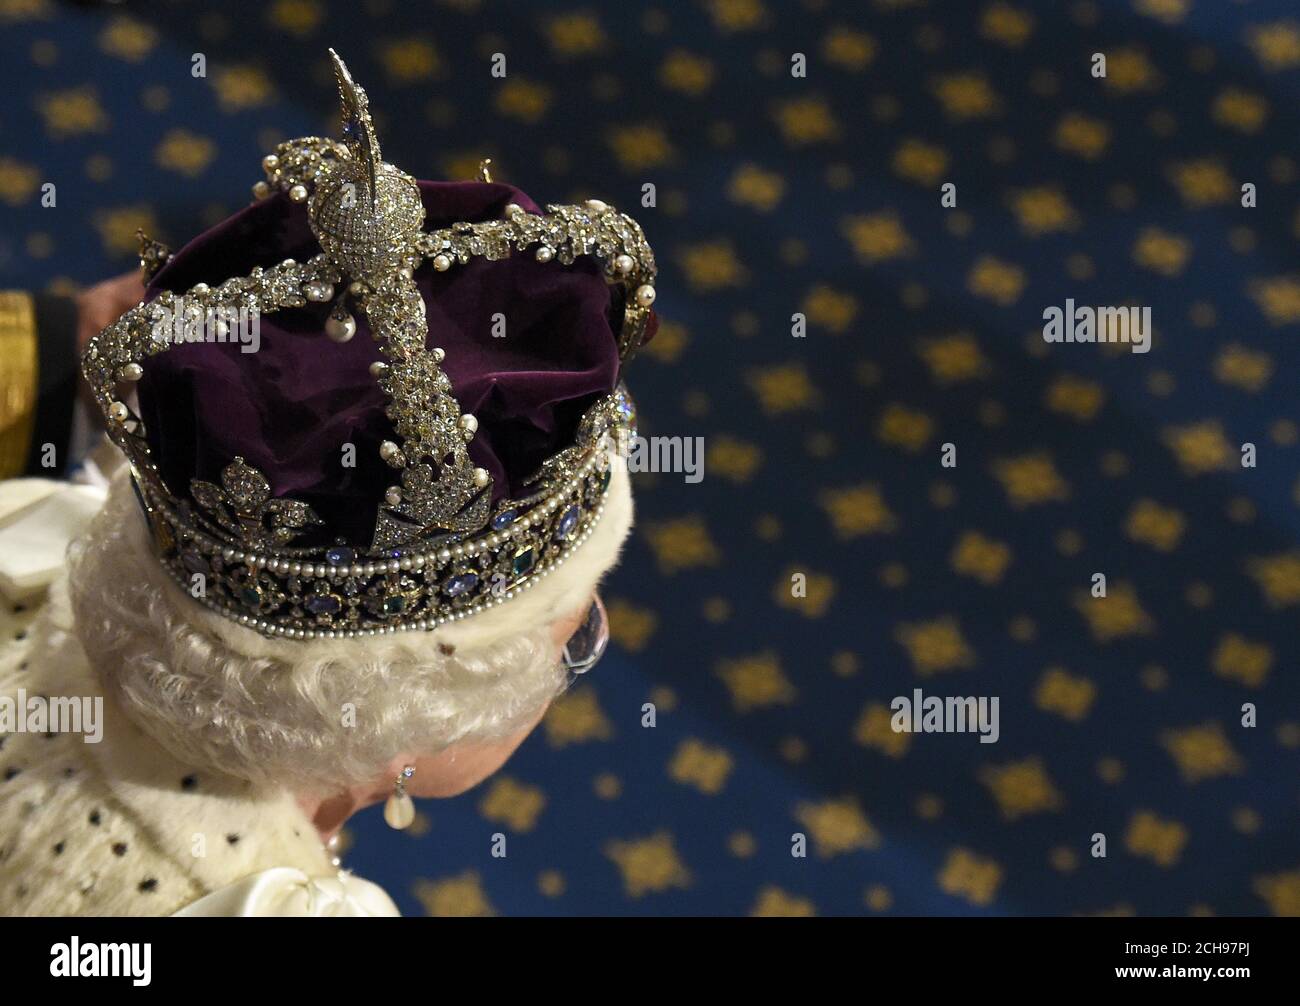 Queen Elizabeth II proceeds through the Royal Gallery ahead of the State Opening of Parliament, in the House of Lords at the Palace of Westminster in London. Stock Photo